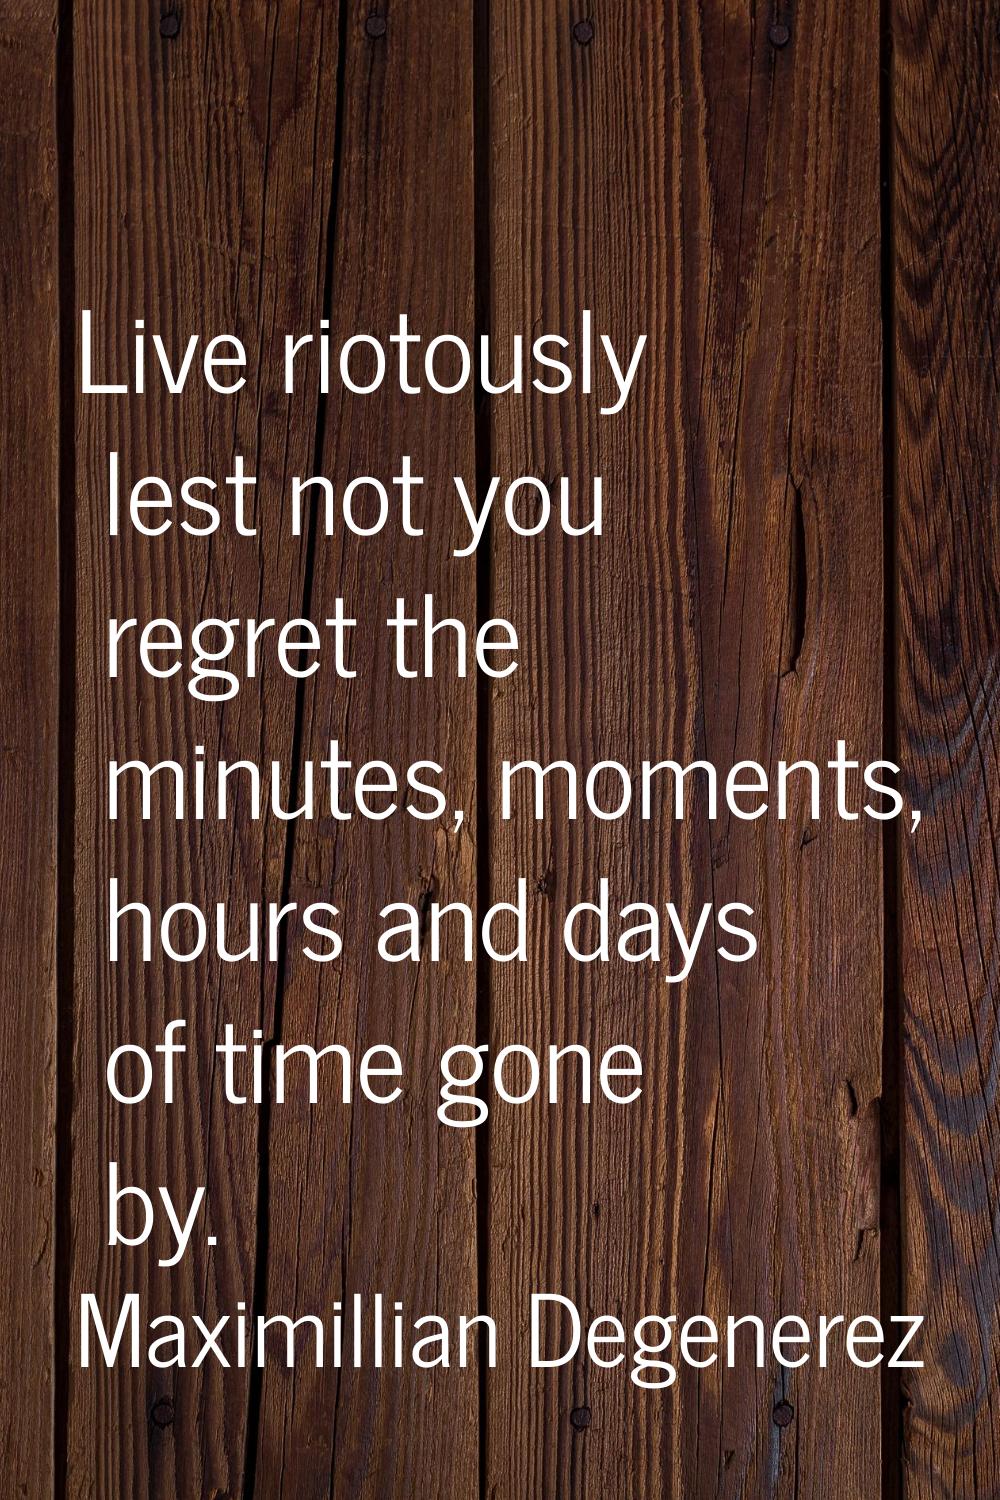 Live riotously lest not you regret the minutes, moments, hours and days of time gone by.